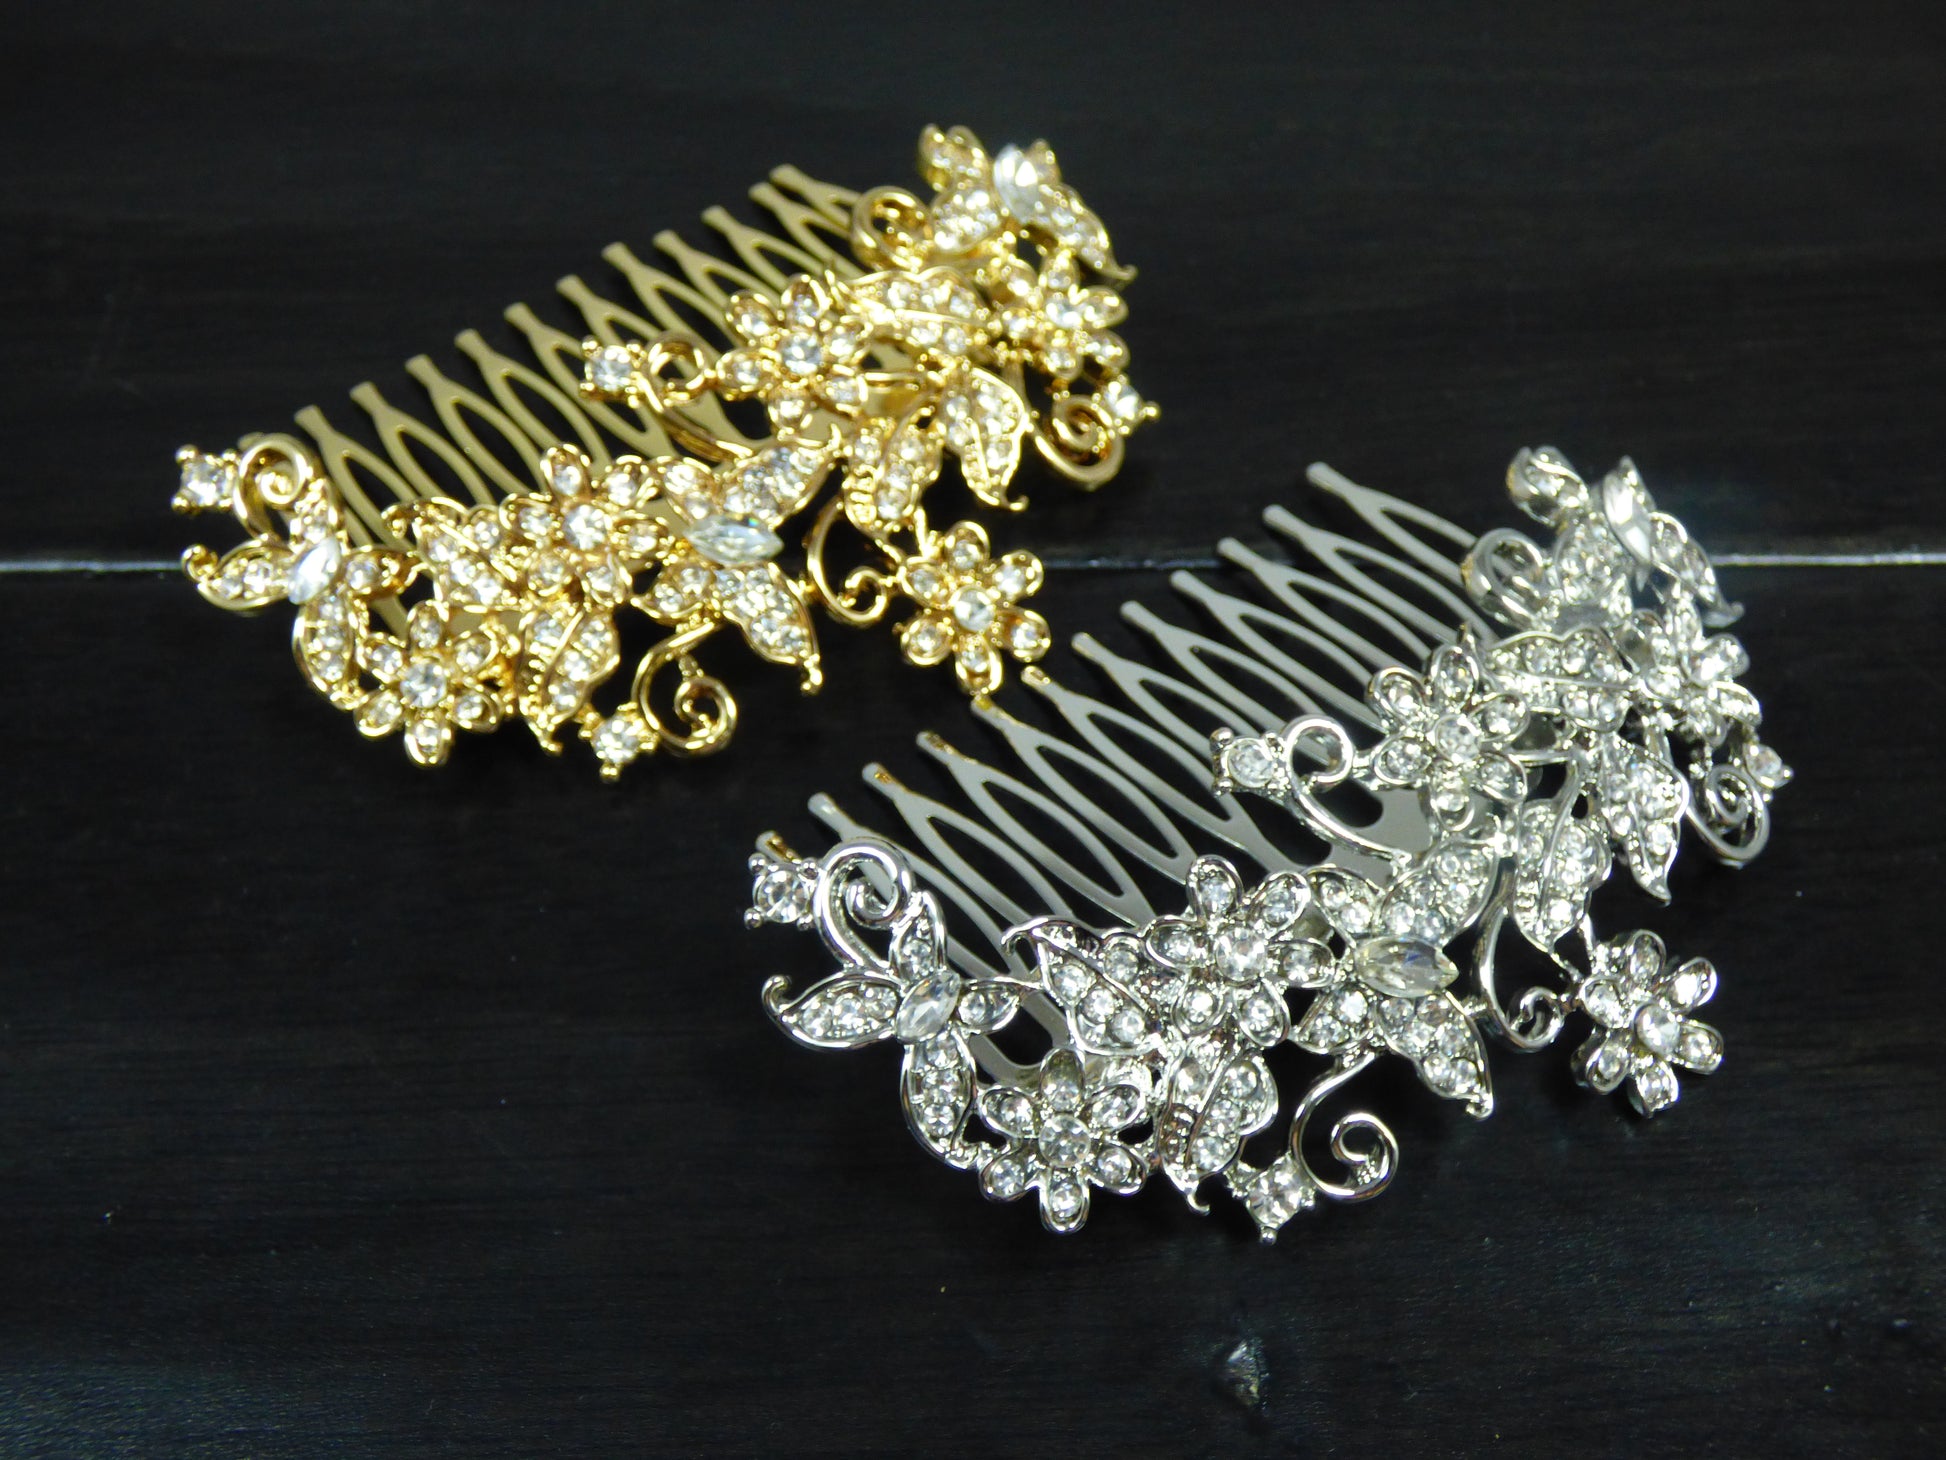 Silver and Gold Leaf Design Bridal Hair Comb